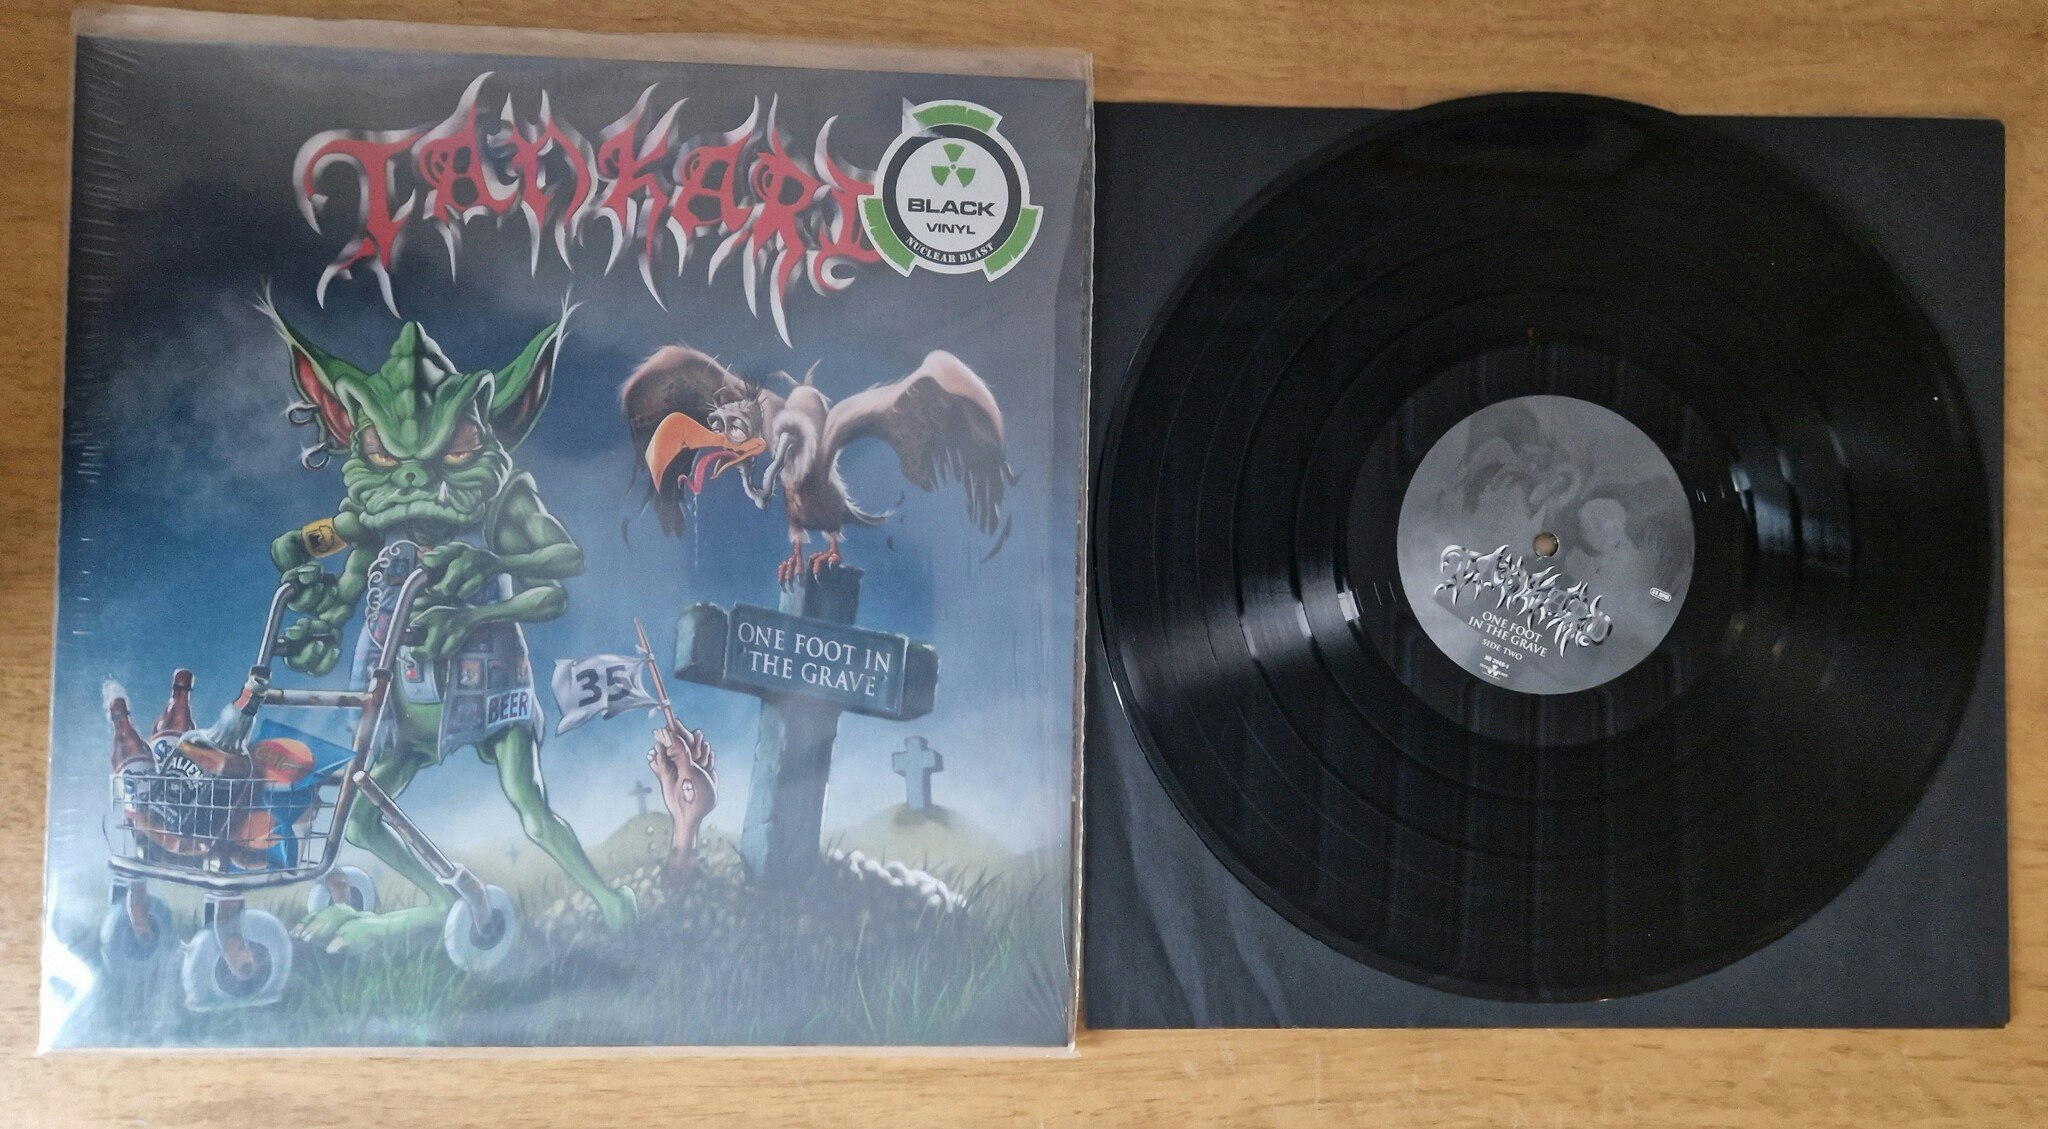 Tankard, One foot in ther grave. Vinyl LP